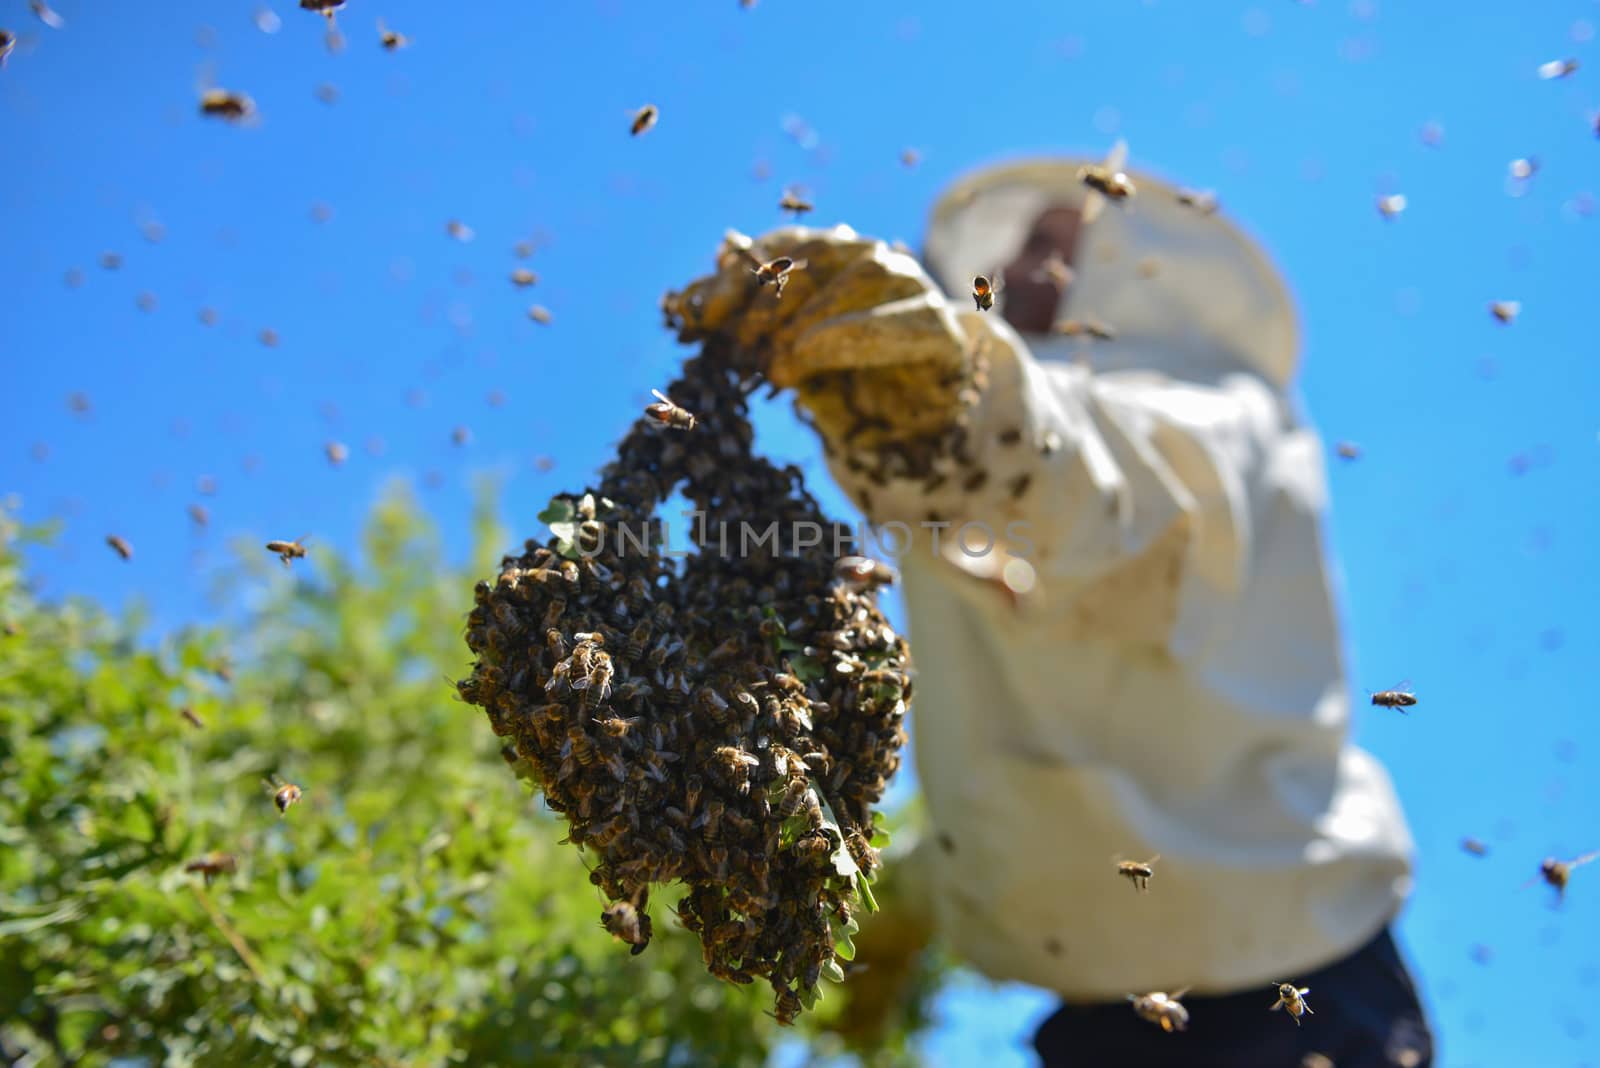 aggressive bees and the bee colony by crazymedia007